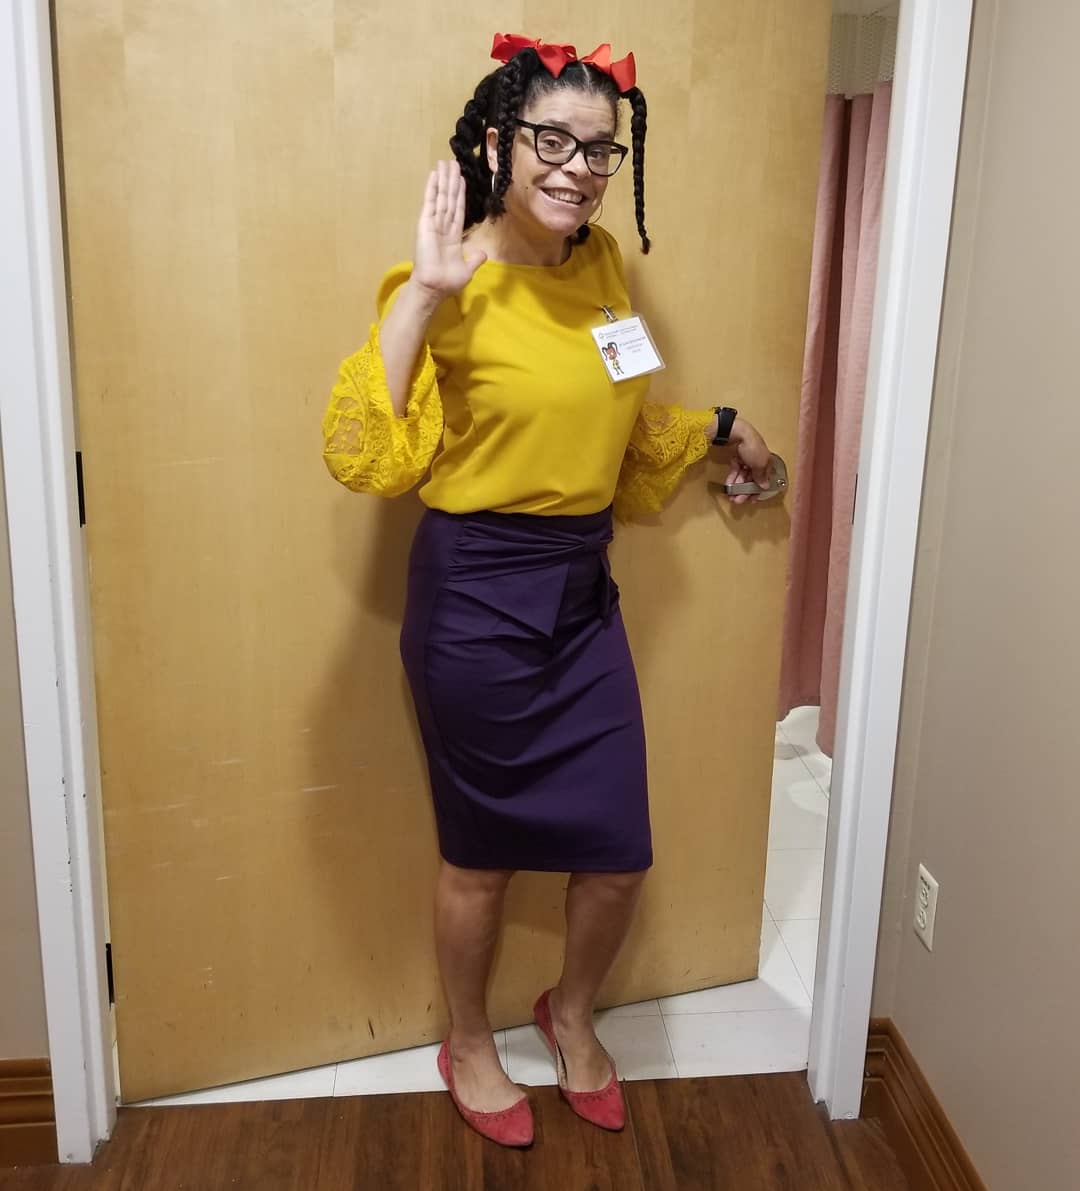 #AcademicTwitter, who are you this #halloween2019? Introducing Dr. Susie Carmichael.
#rugratshalloween 
#medtwitter
#AcademicChatter